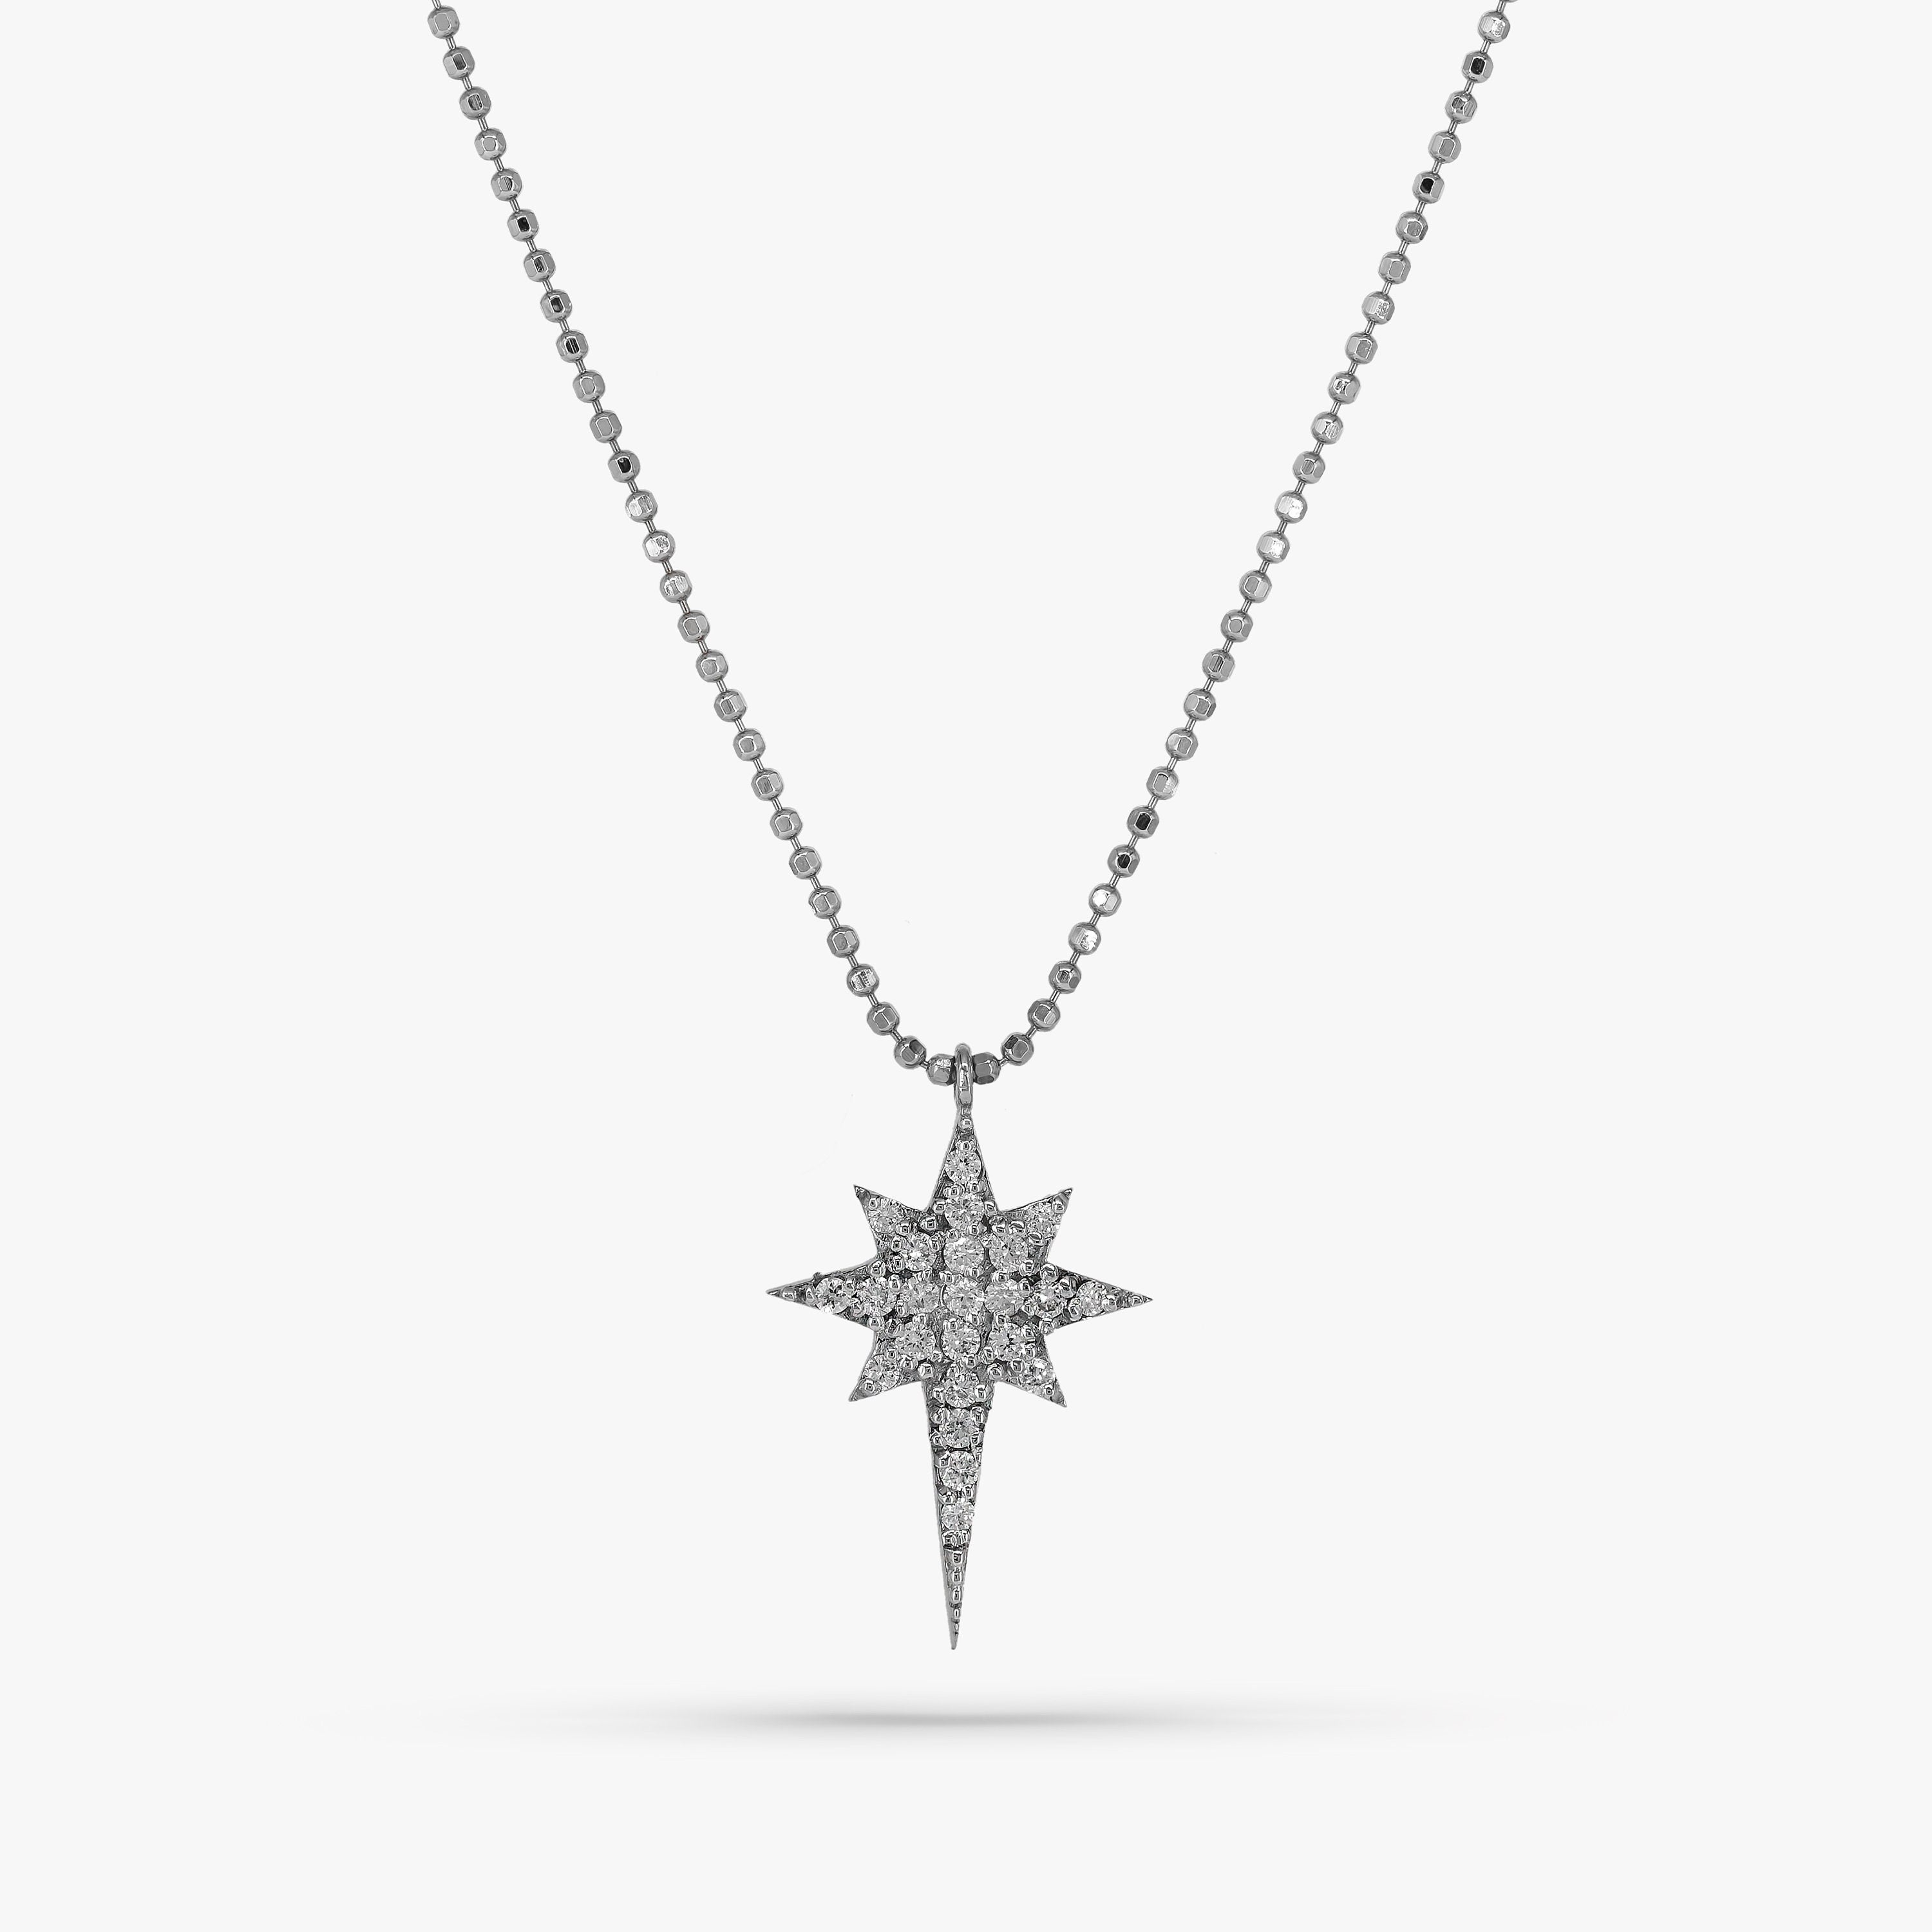 Diamond North Star Necklace With Ball Chain in 14K Gold